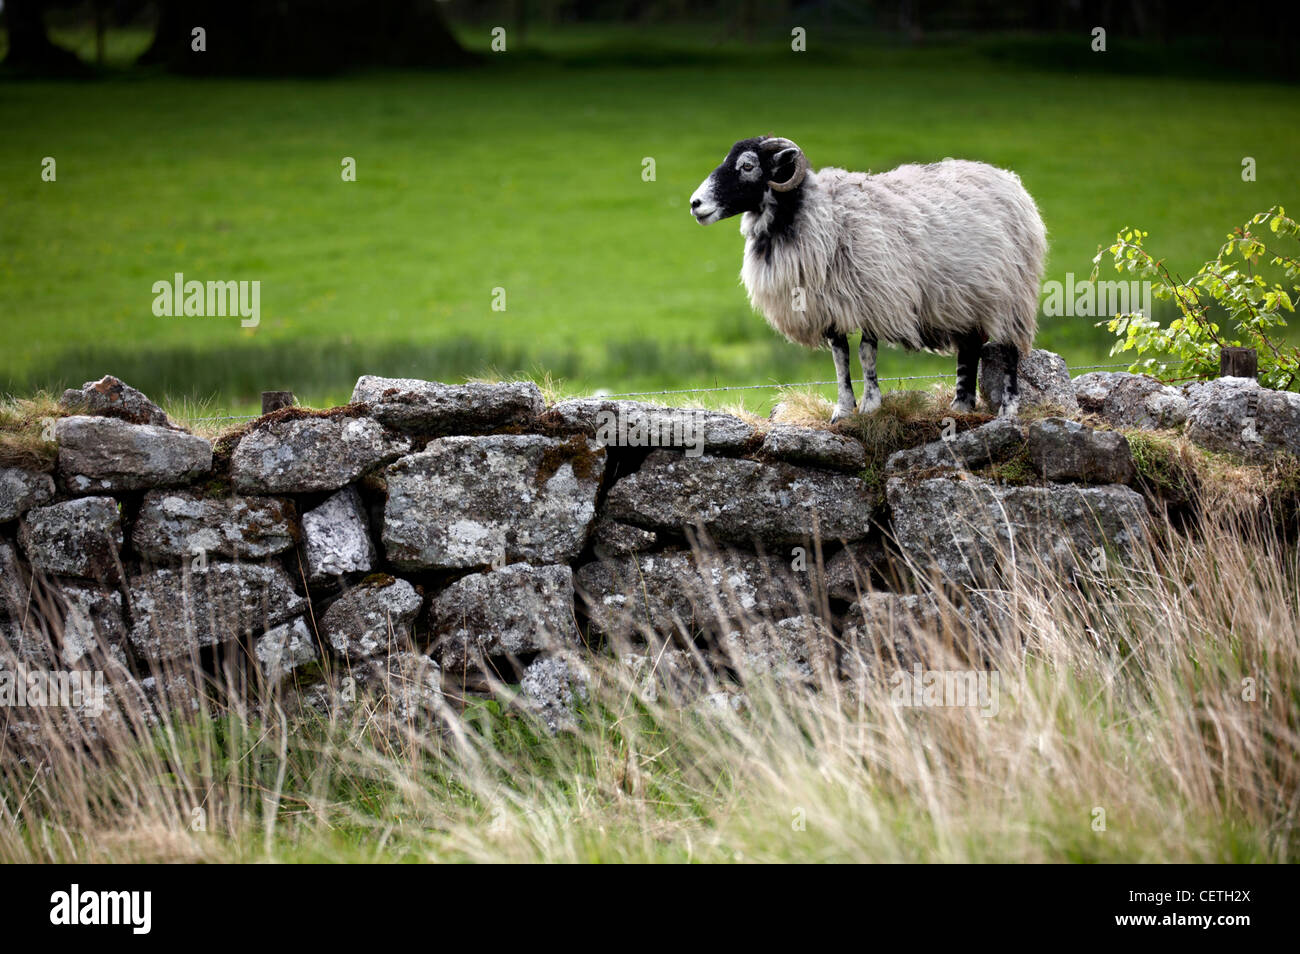 A Dartmoor sheep on a dry stone wall. There are two native breeds of sheep bearing the name Dartmoor - the White Face and the Gr Stock Photo